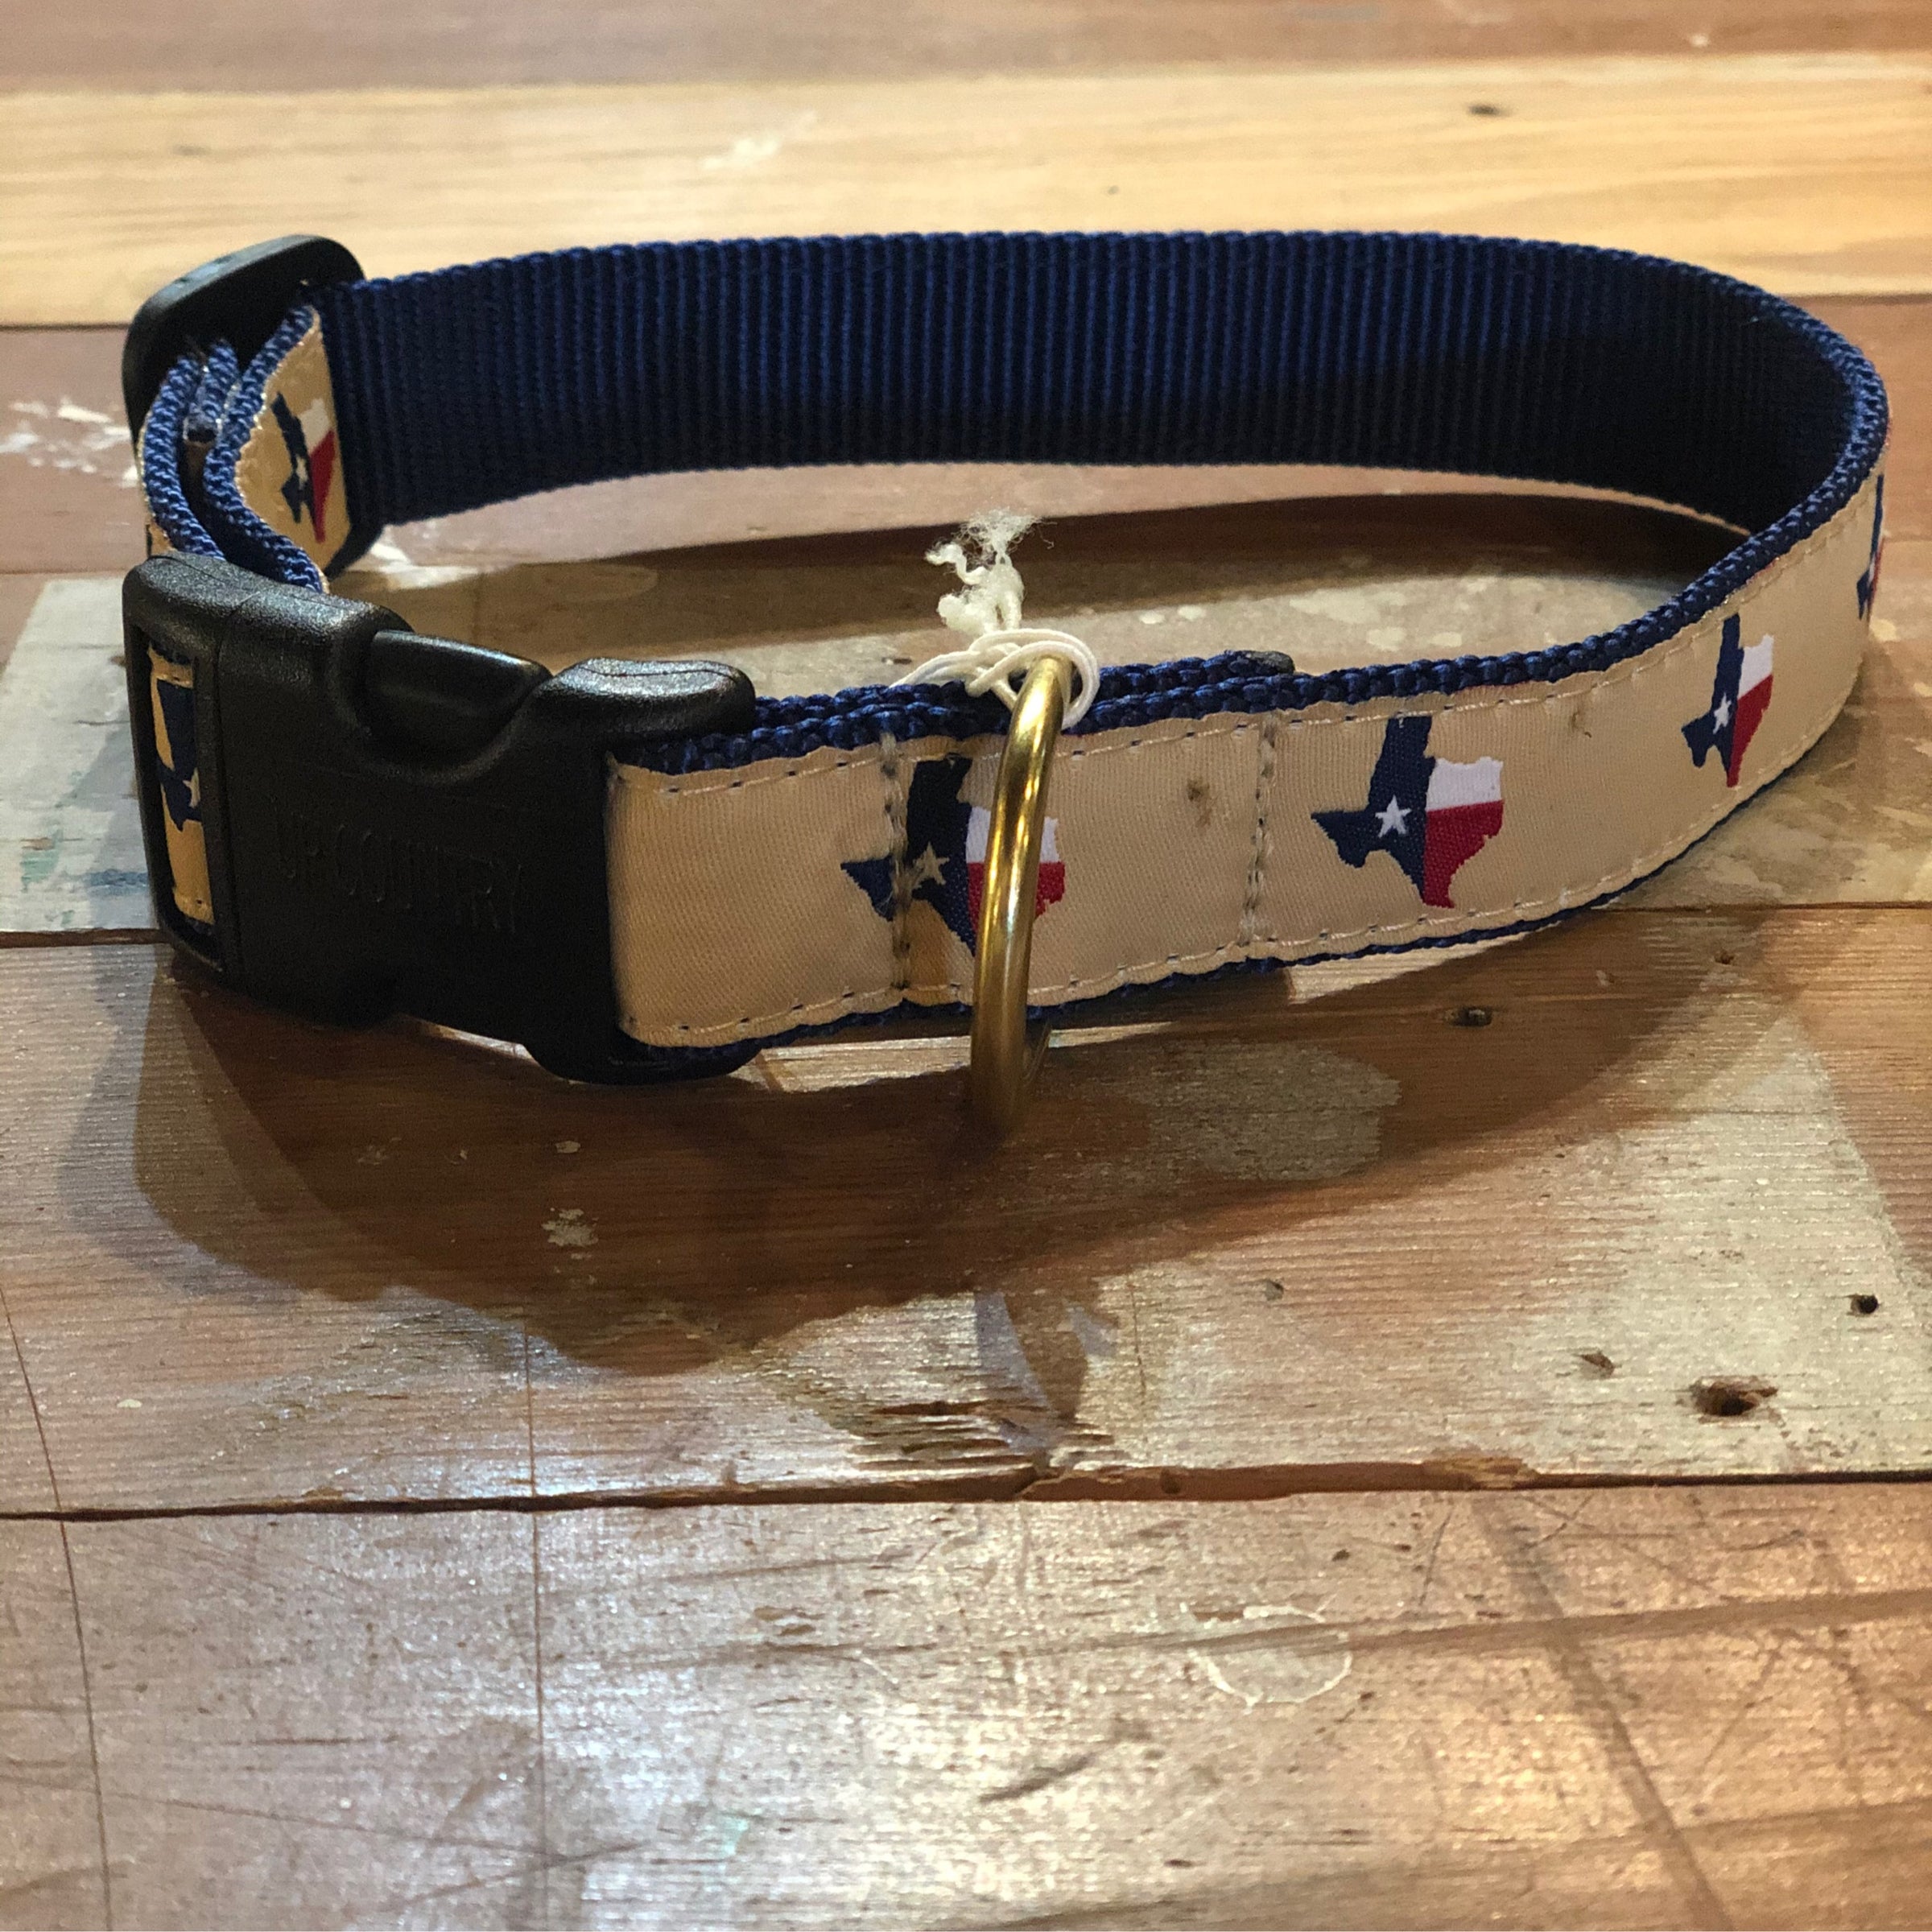 Blue Chewy Vuitton Collar